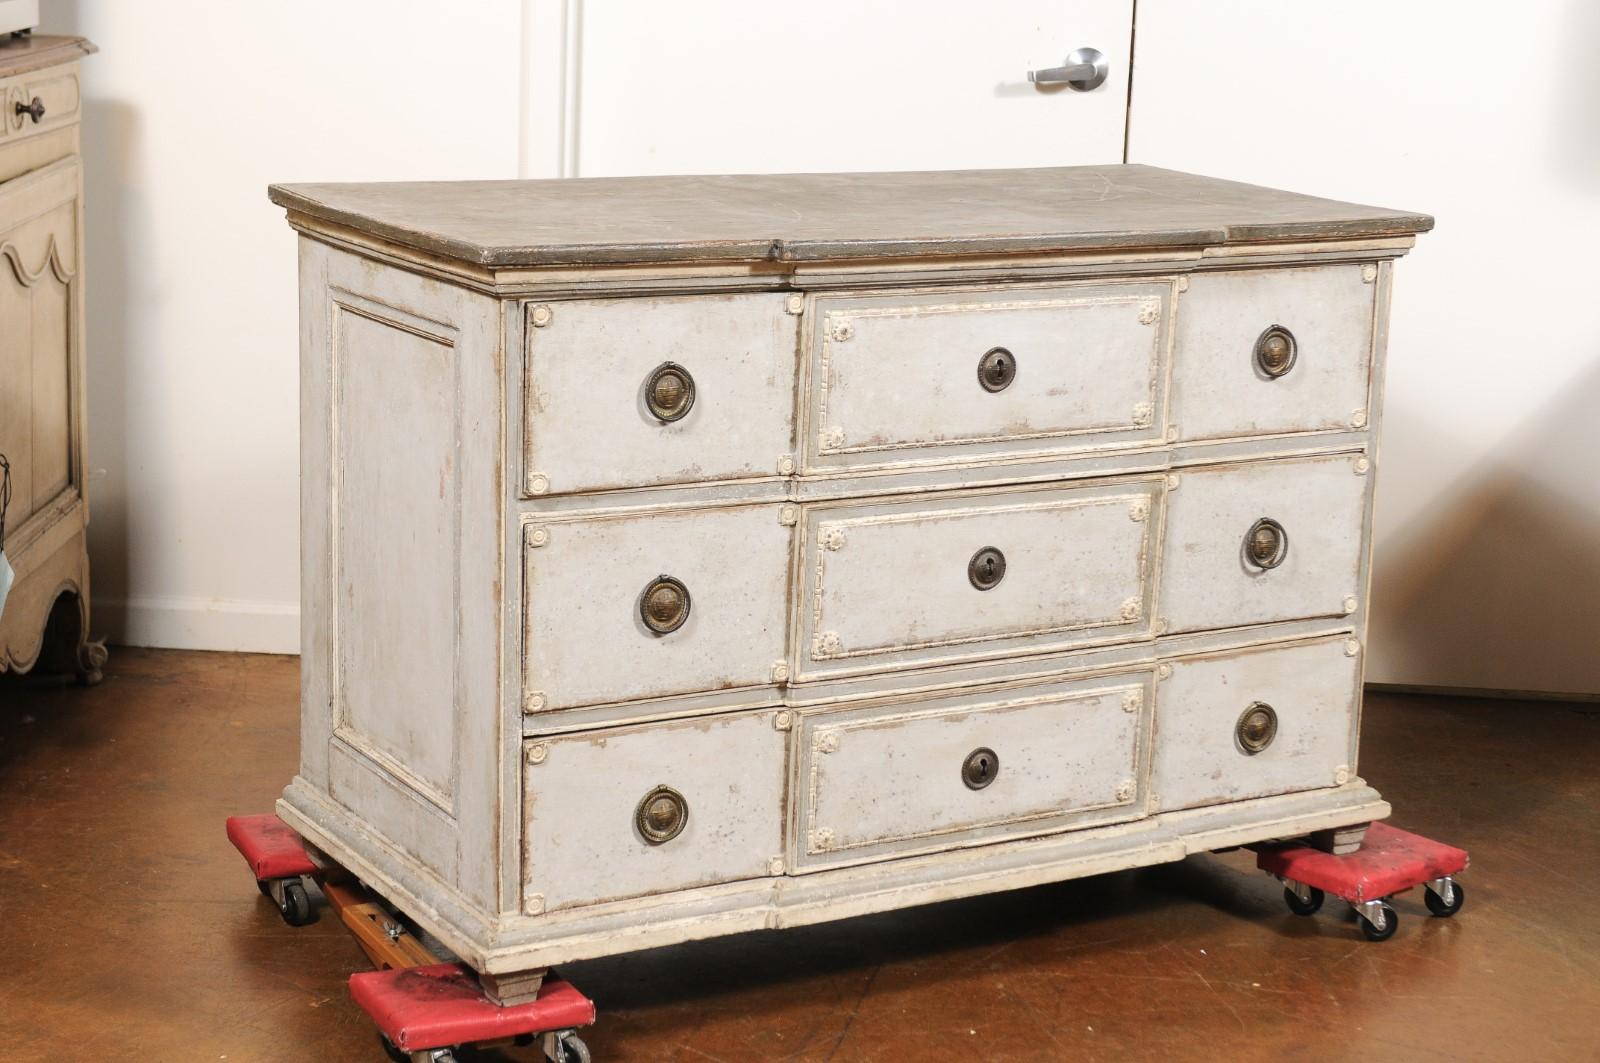 A French Louis XVI period painted three-drawer breakfront commode from the late 18th century. Born in the last quarter of the 18th century under the reign of France's last monarch of the Ancient Régime Louis XVI, this painted commode features a